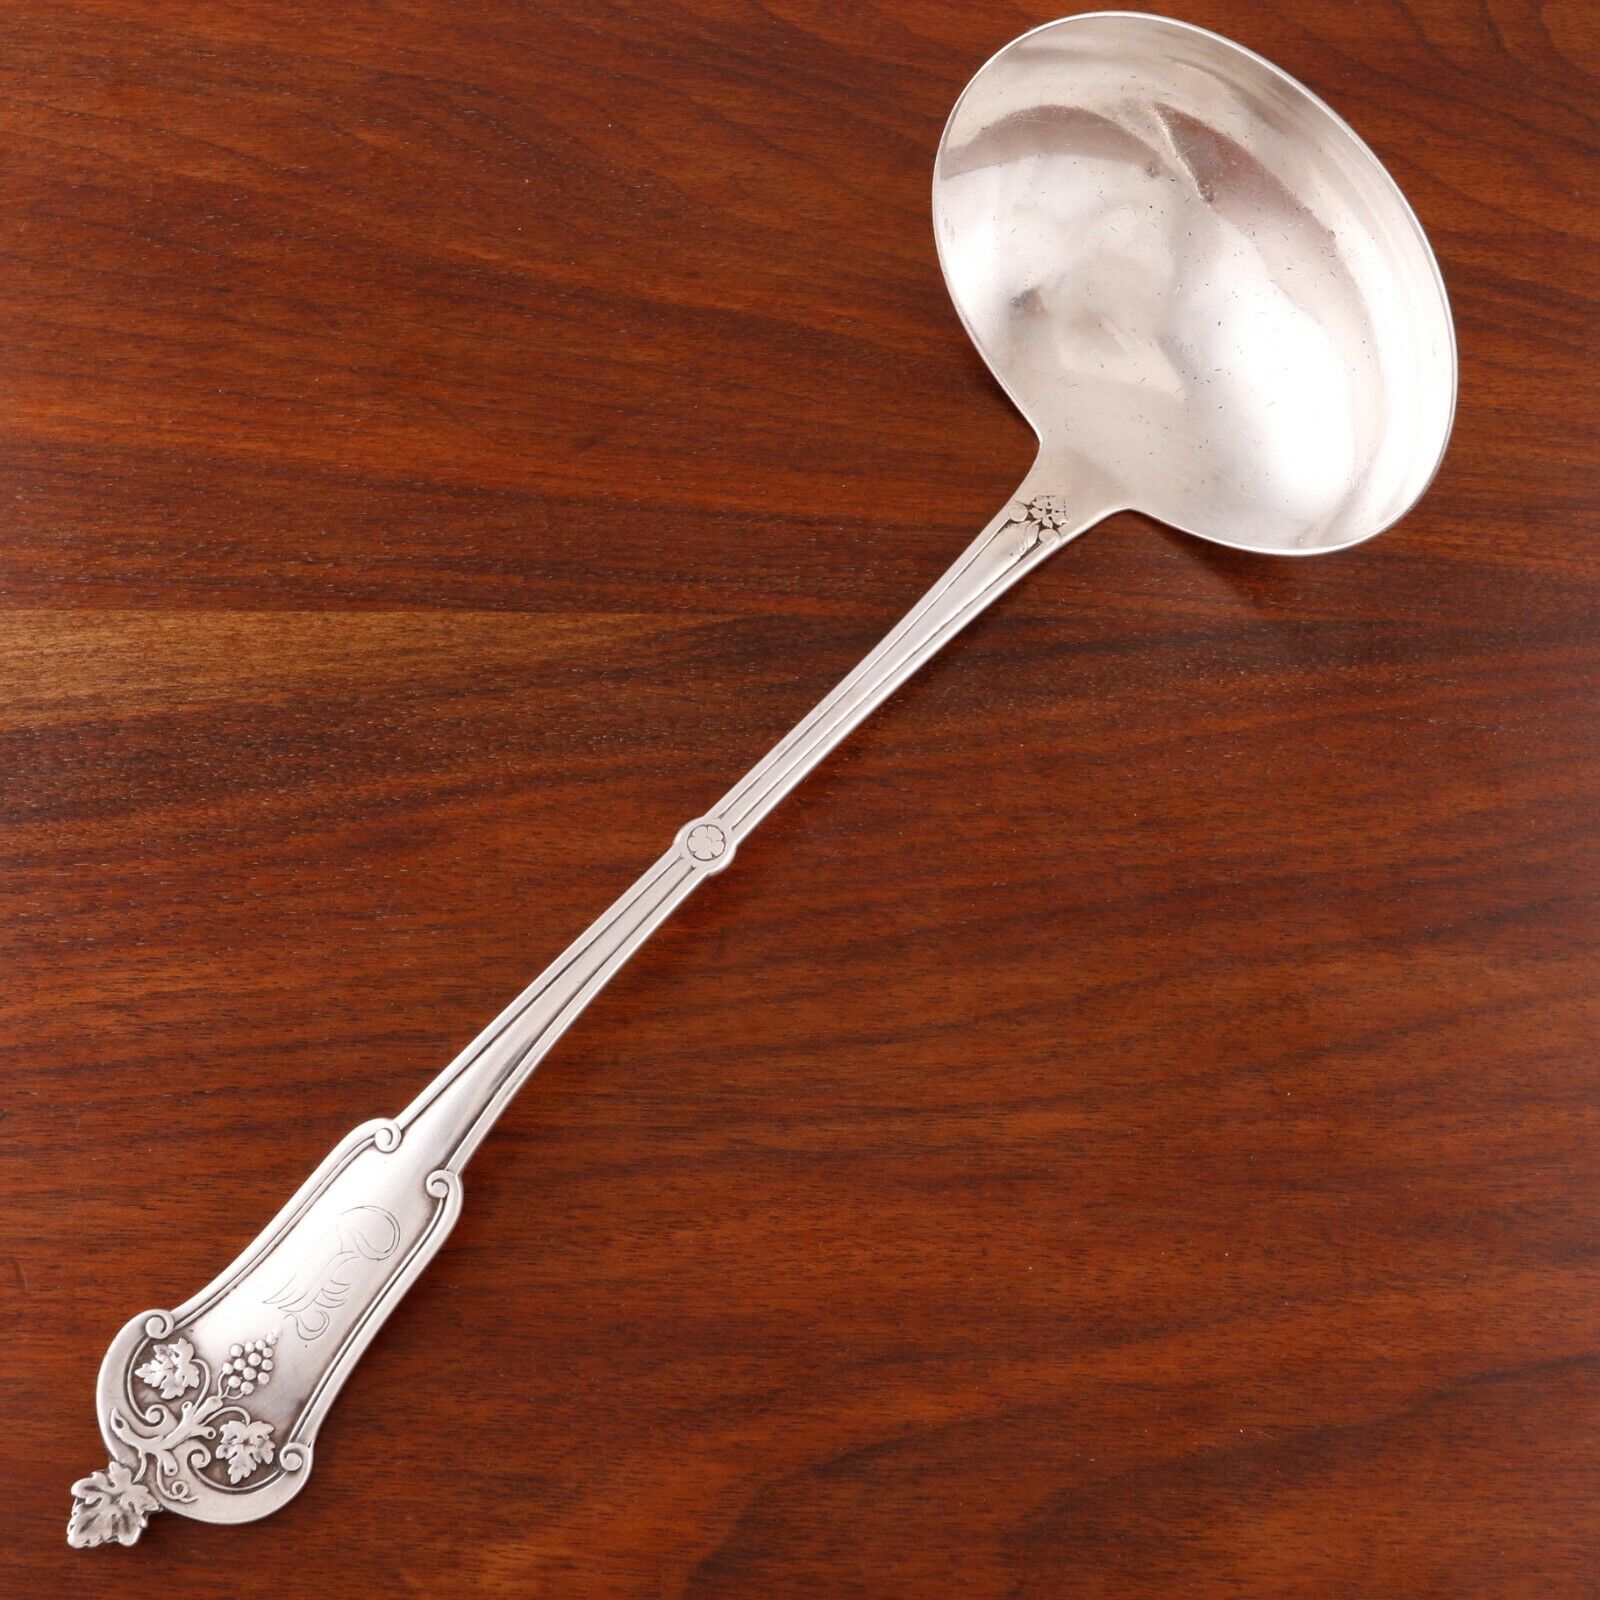 Antique Valuations: FARRINGTON & HUNNEWELL COIN SILVER SOUP / OYSTER LADLE GRAPE VINE 1835-85